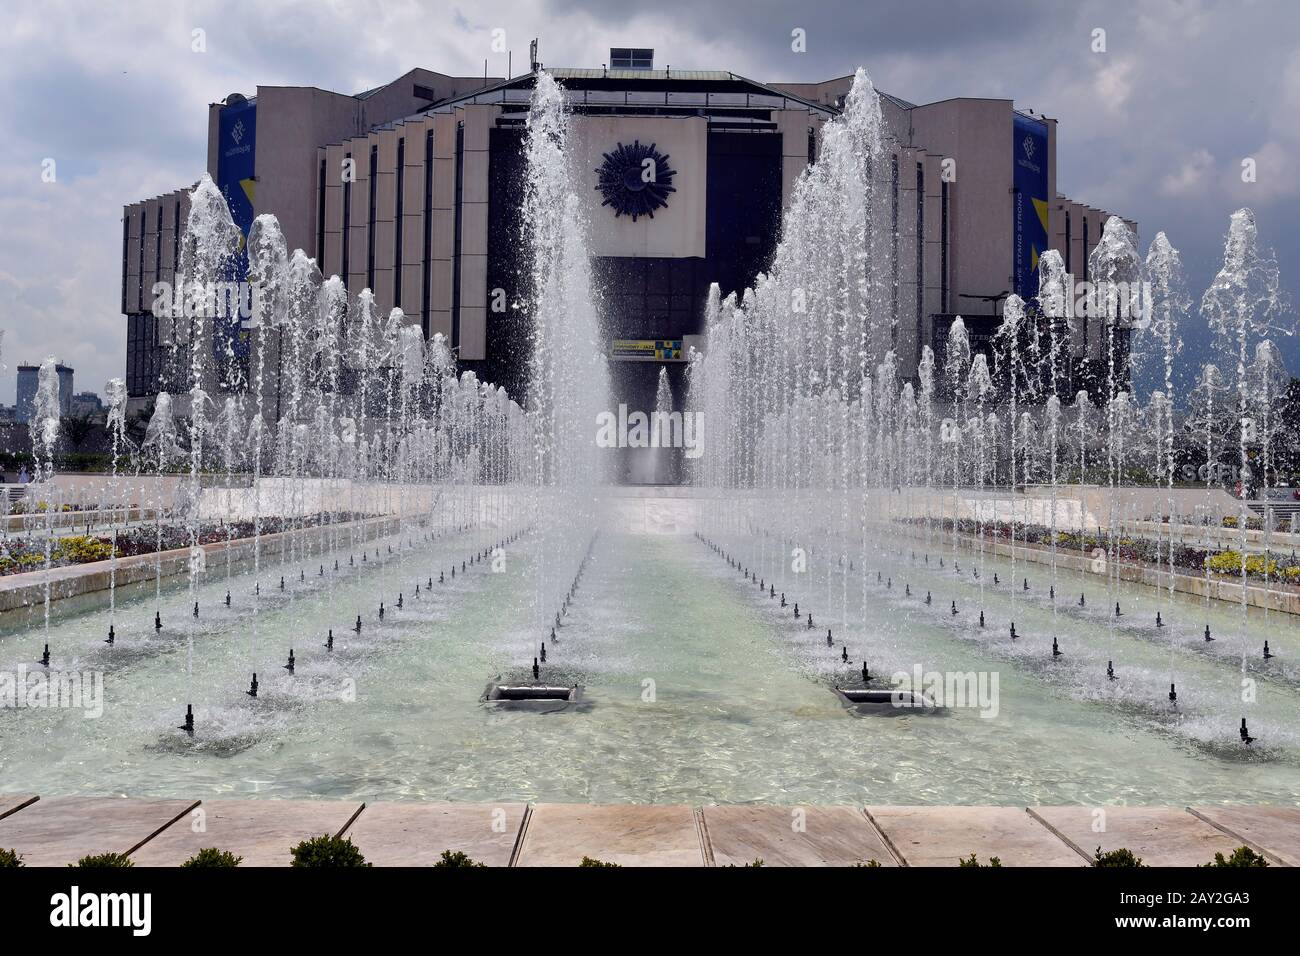 Sofia, Bulgaria - June 16, 2018: Impressive building and fountains, the National Palace of Culture Stock Photo